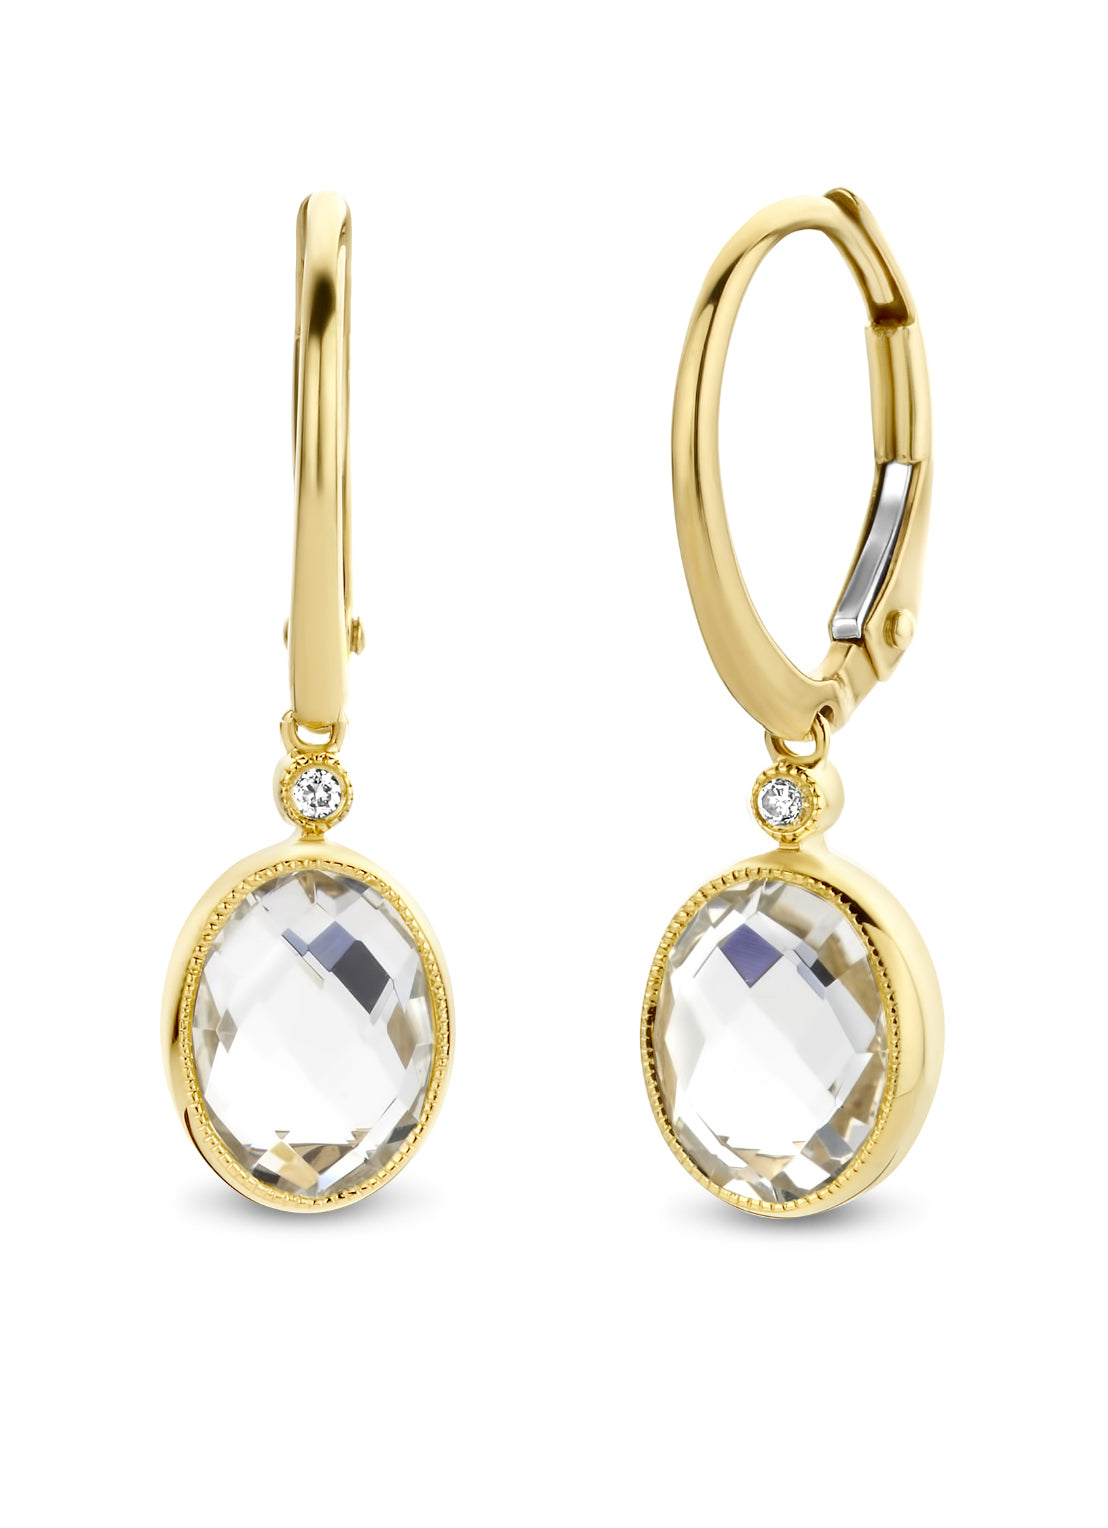 Yellow gold ear jewelry, 3.21 ct white topaz, philosophy